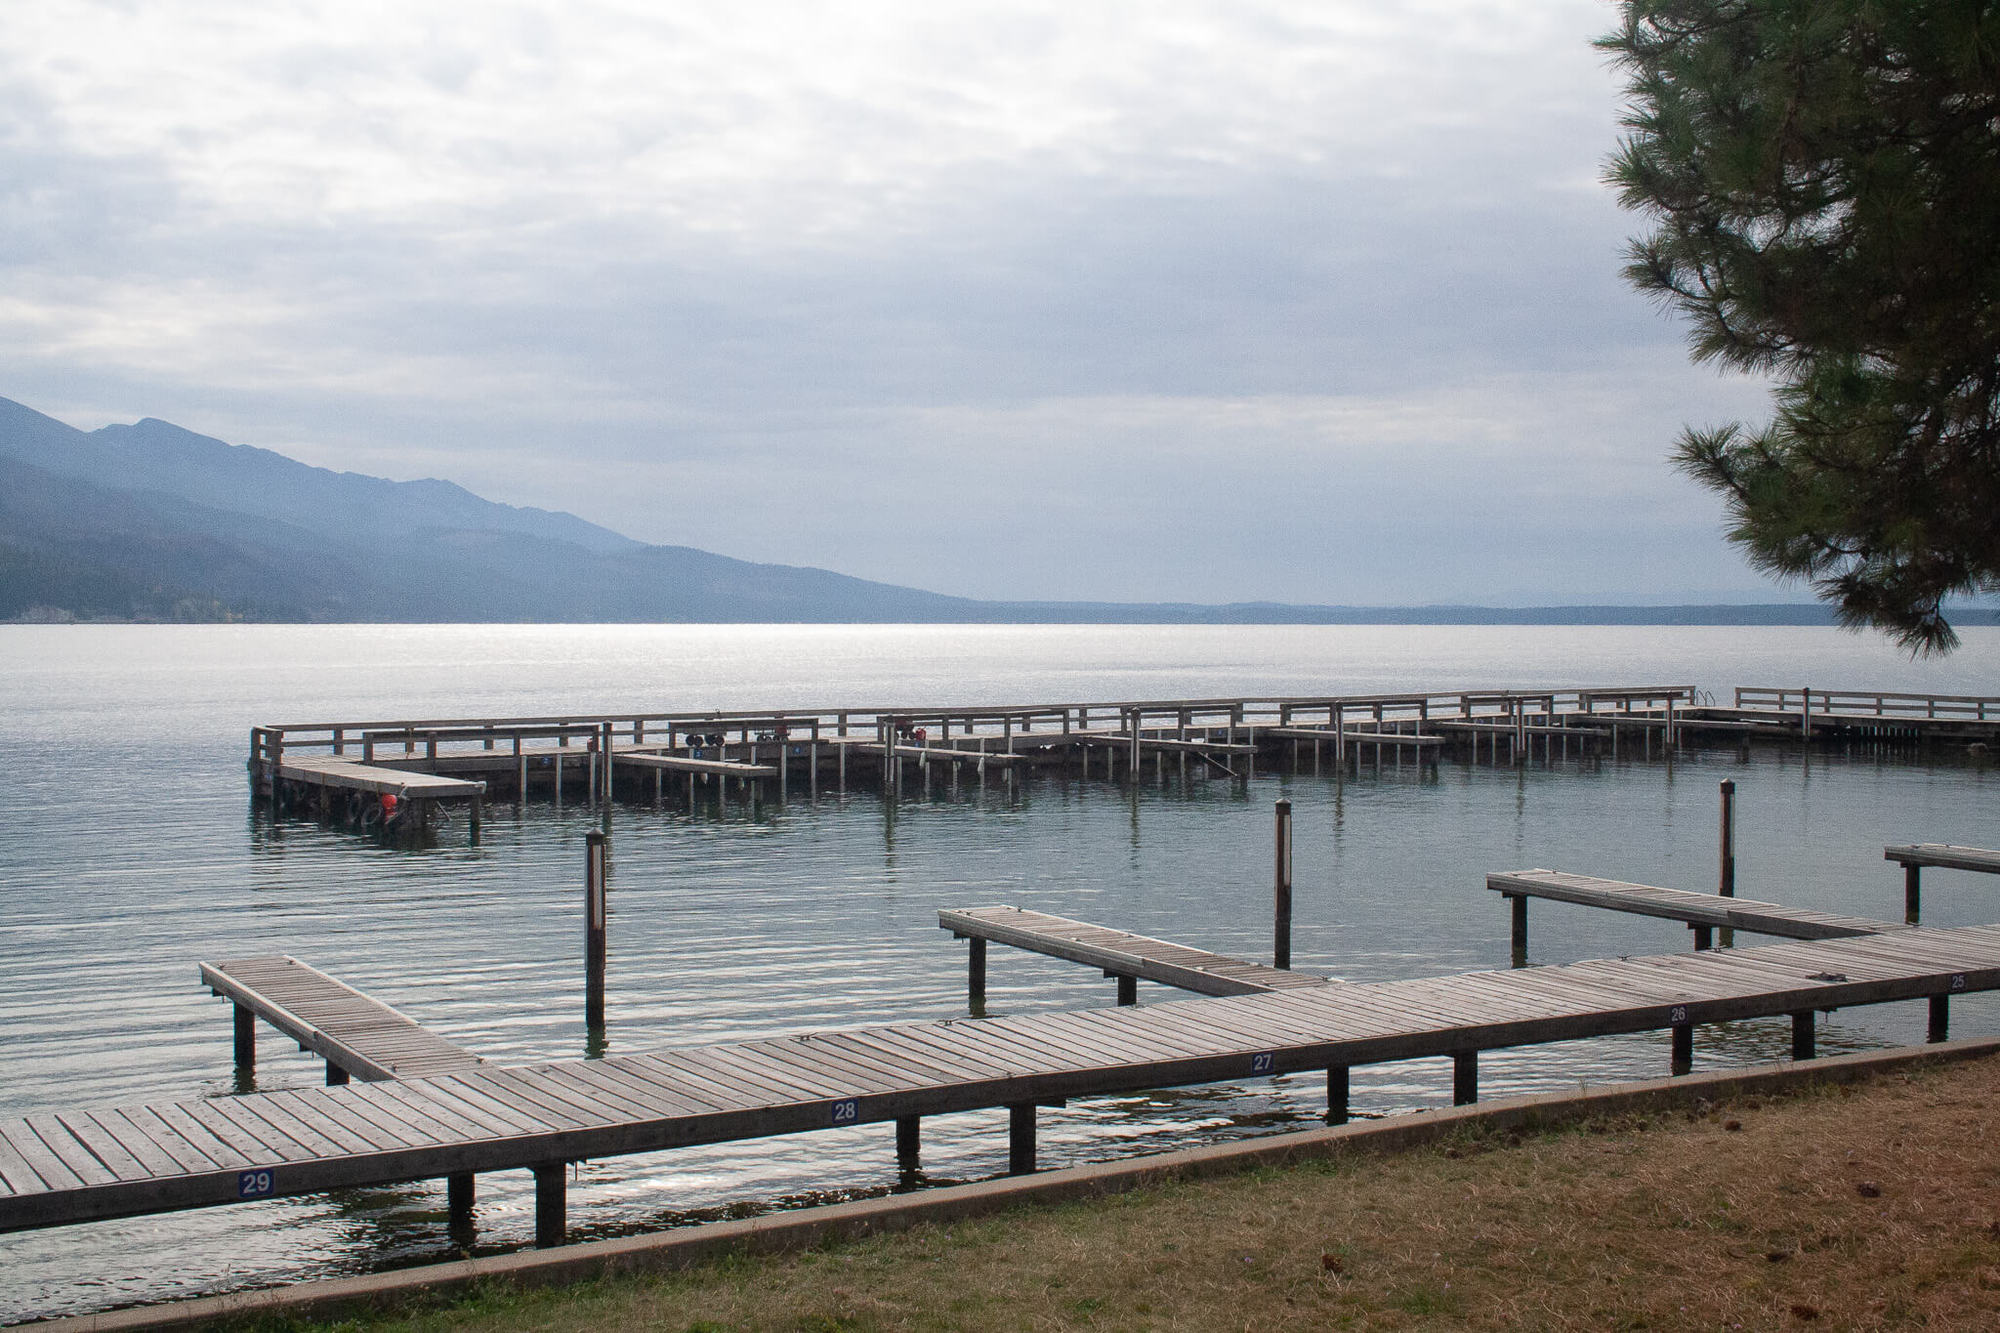 Approximately half of Flathead Lake sits on the CSKT’s reservation, so the lake is co-managed by the CSKT and Montana Fish, Wildlife and Parks. November 2021